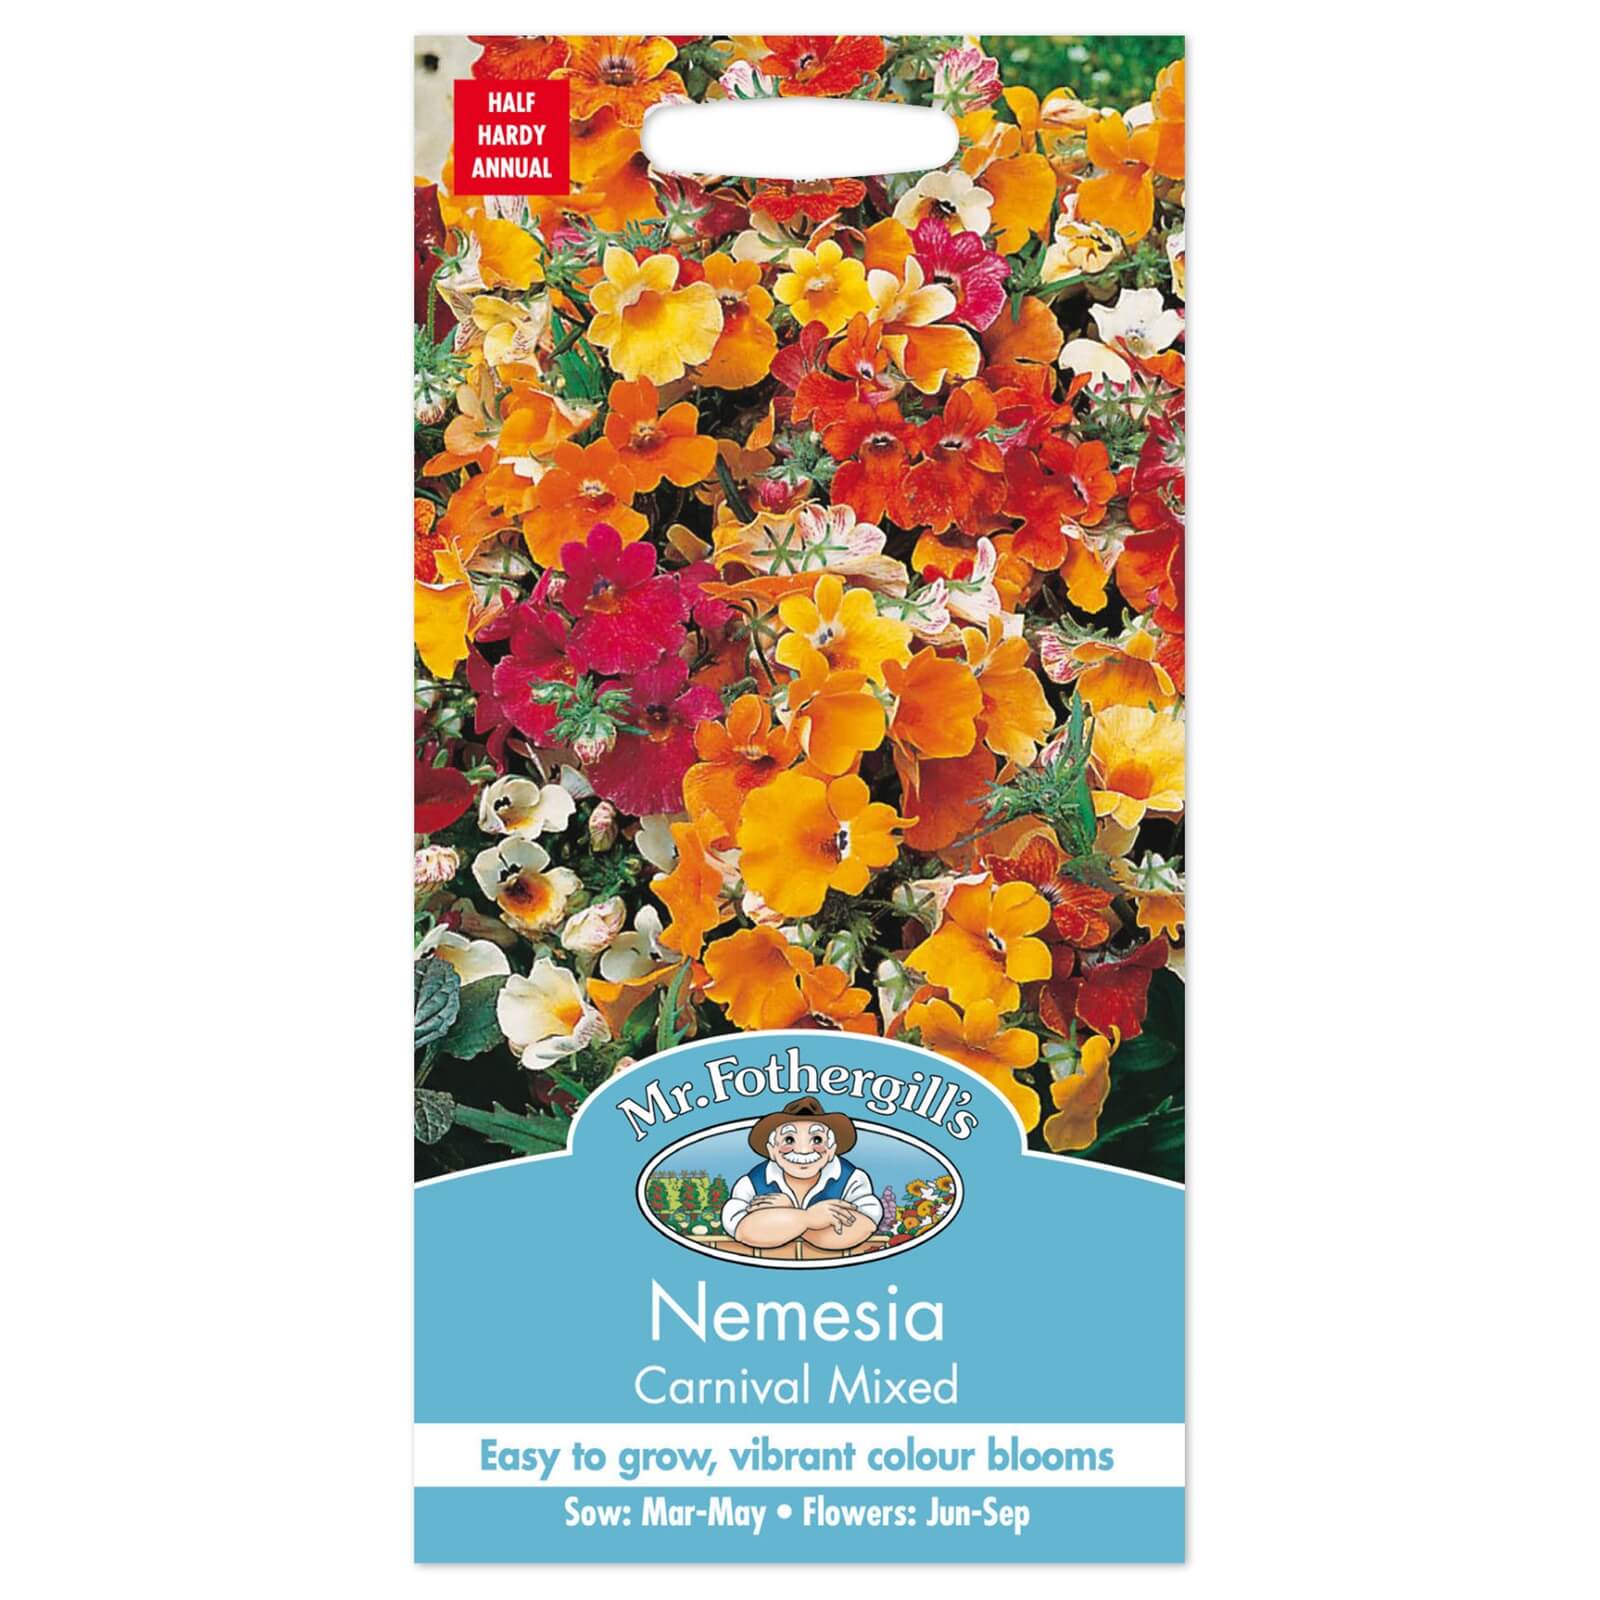 Mr. Fothergill's Nemesia Carnival Mixed Seeds